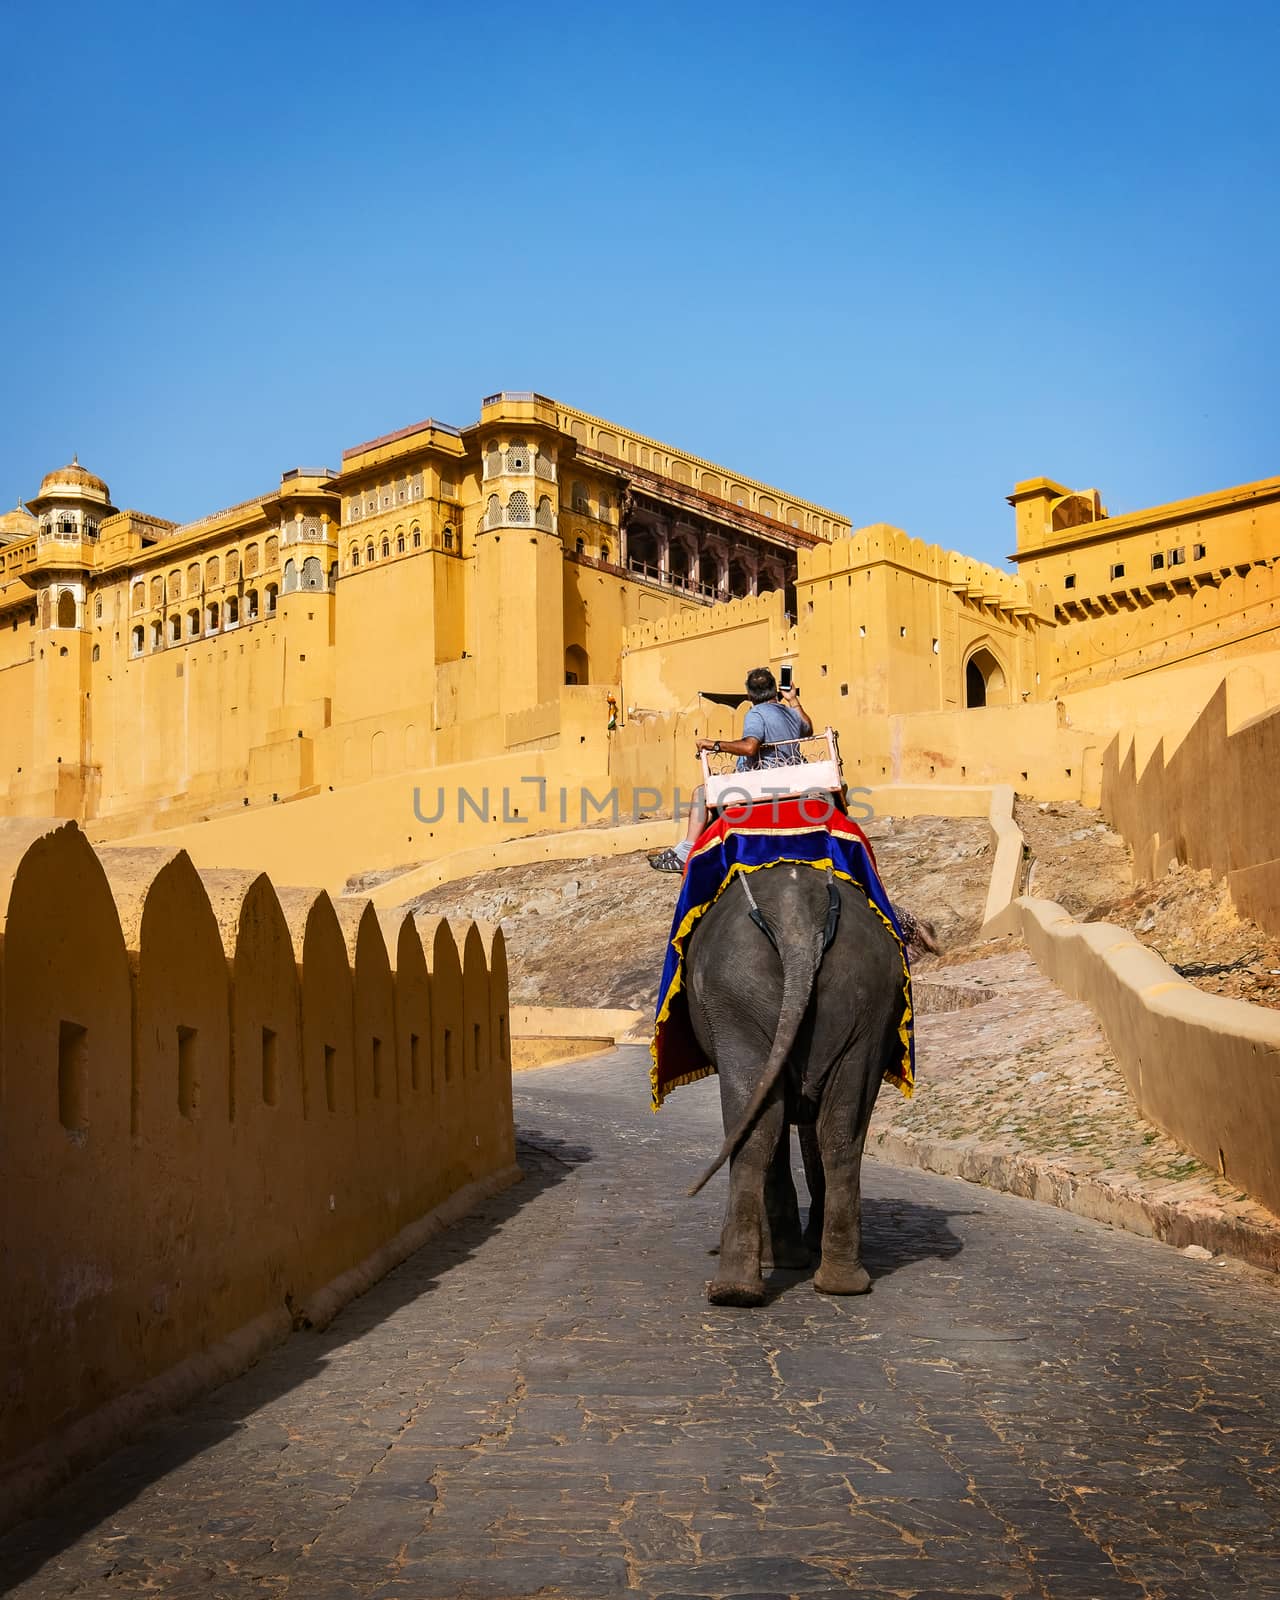 Amer Fort in Jaipur, Rajasthan, India. by Tanarch